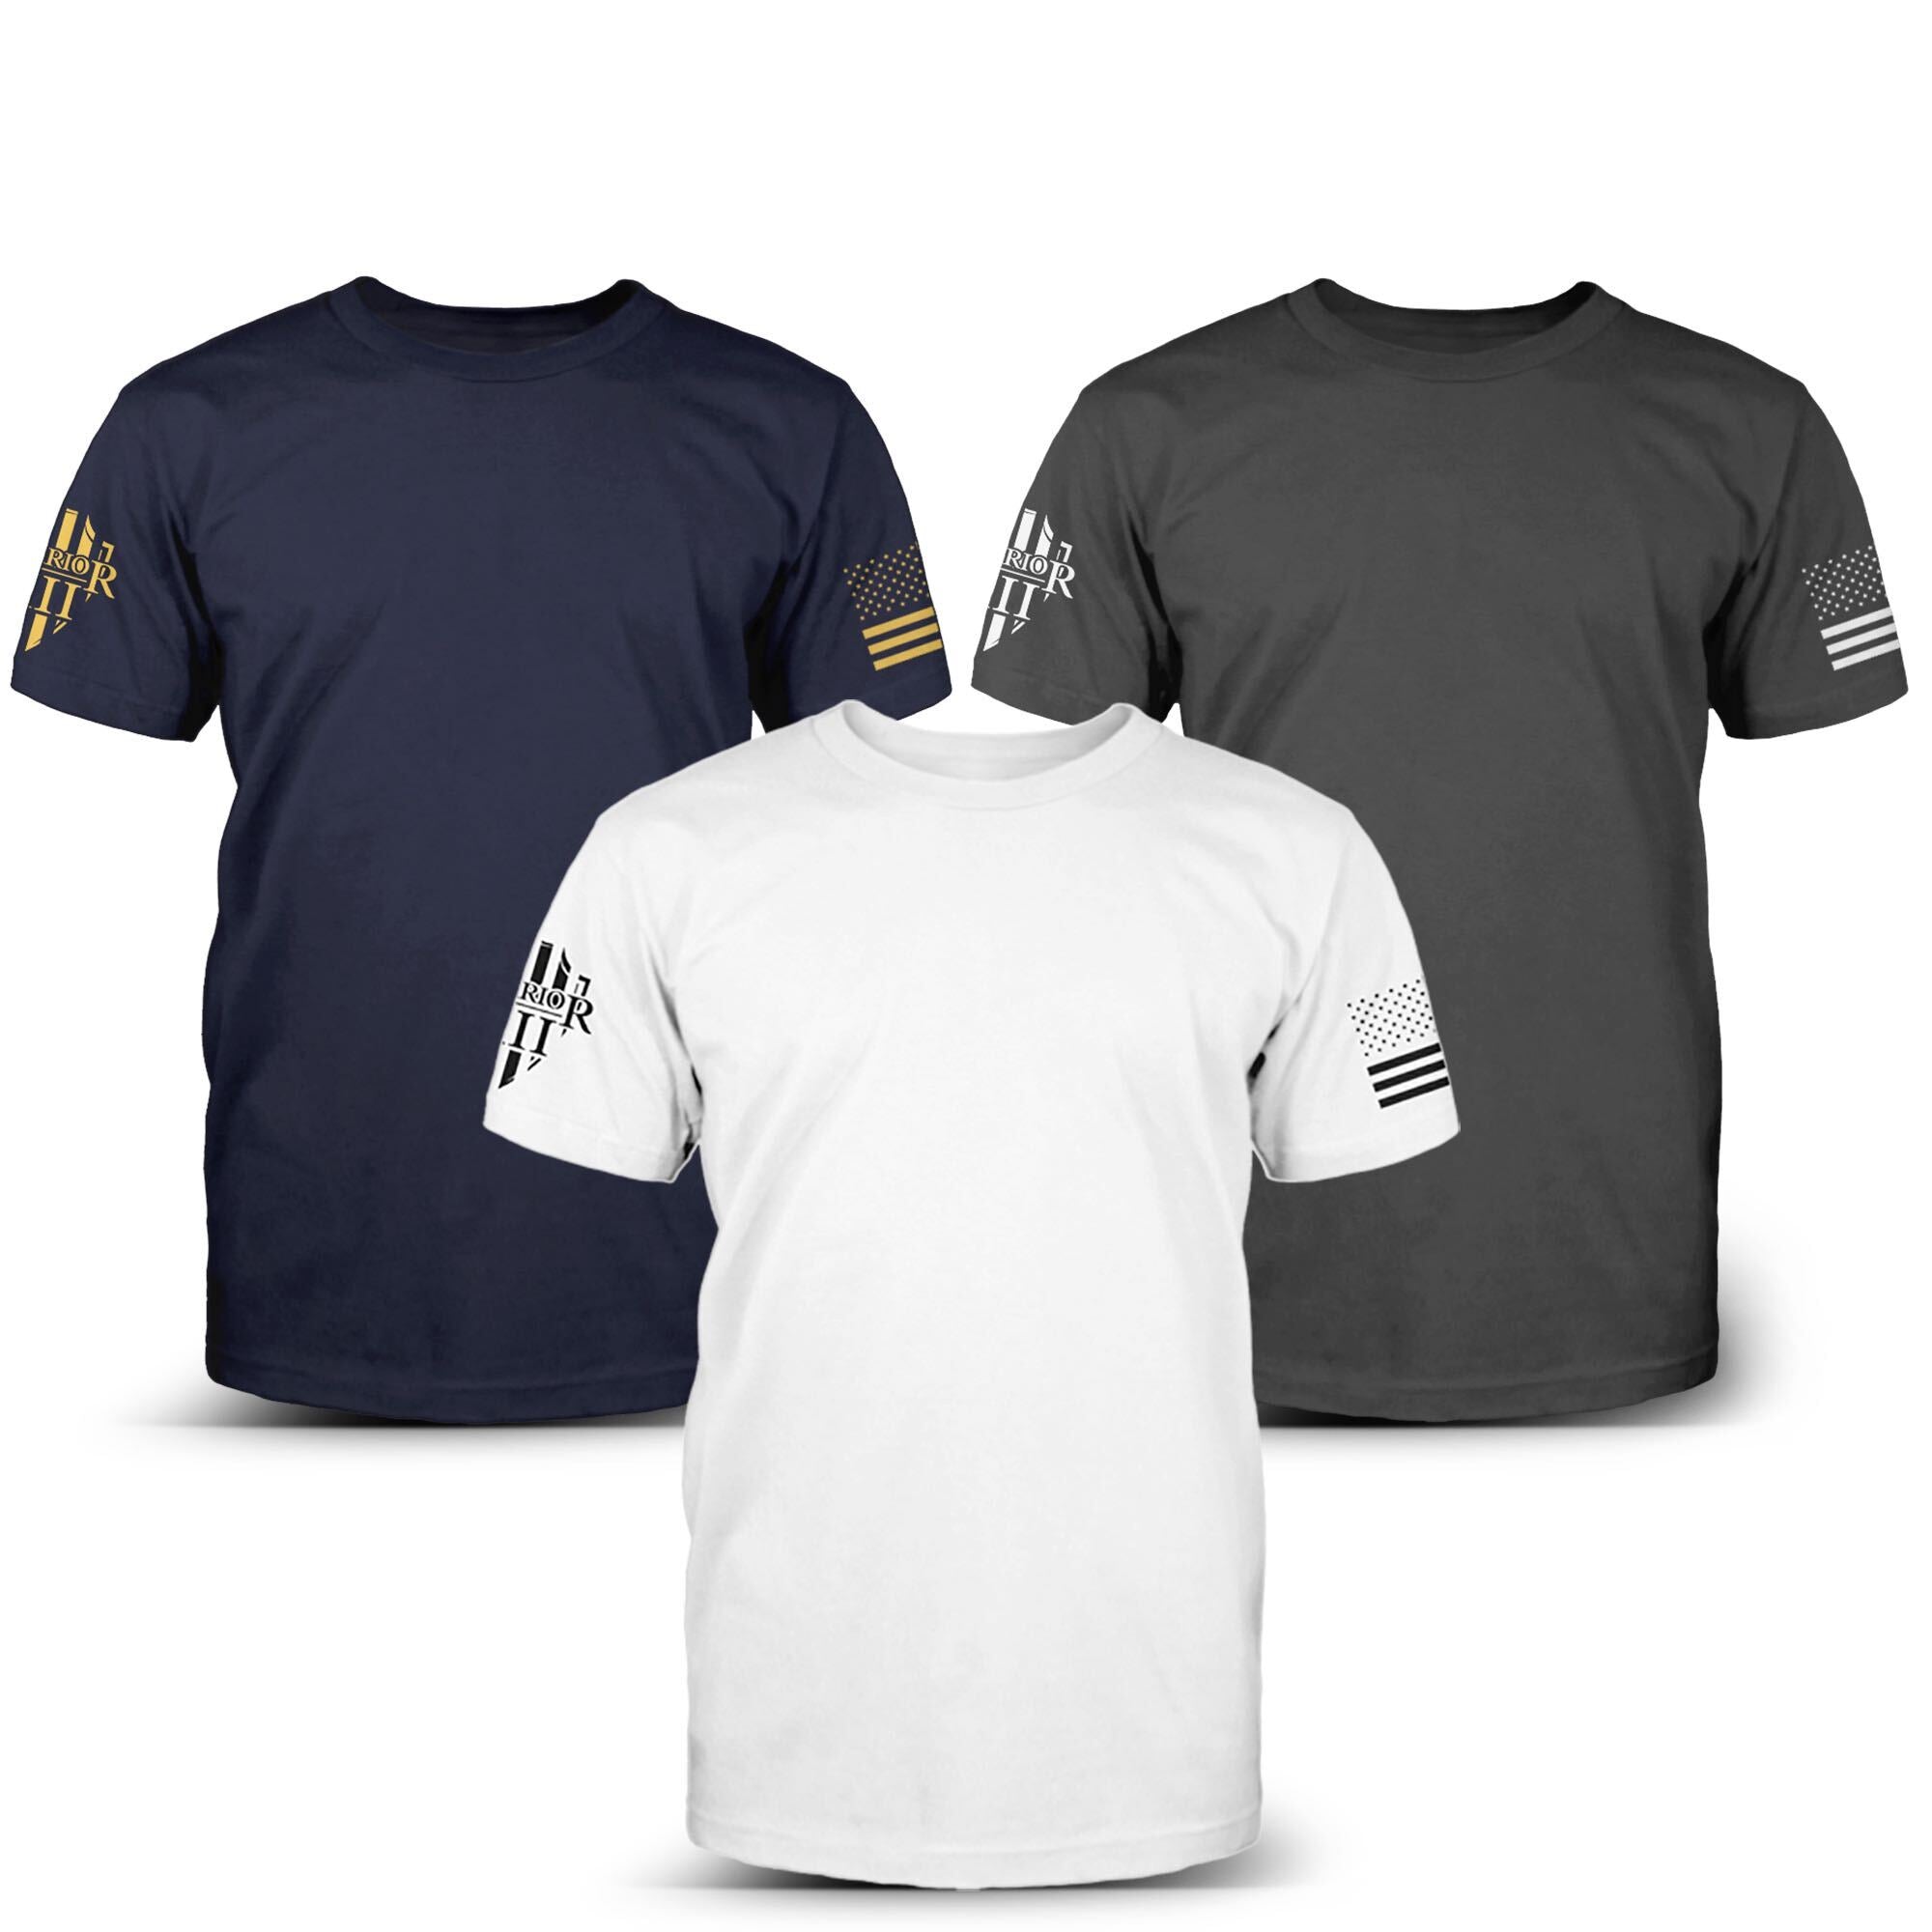 Navy, White, and Asphalt Grey 100% cotton t-shirts with the Warrior 12 logo and an American Flag on the sleeves.